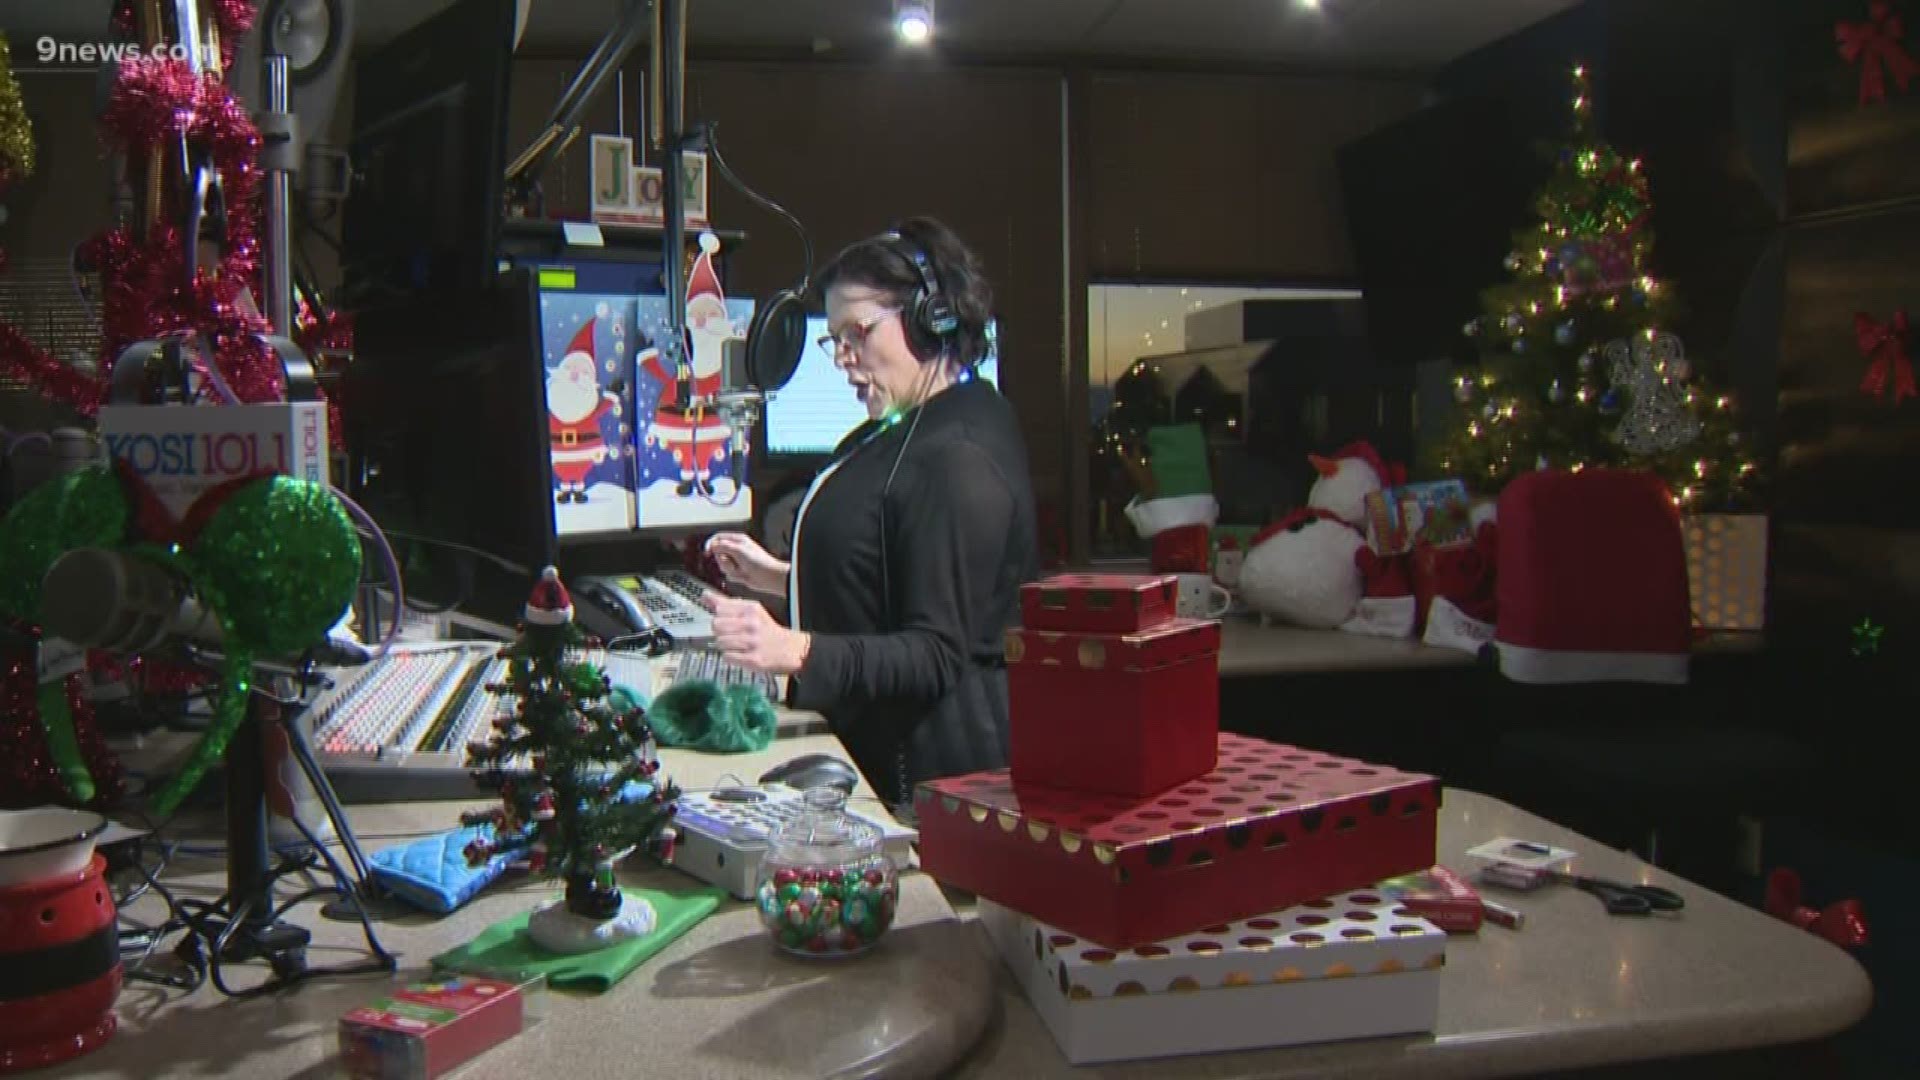 KOSI played Christmas music in March to help make people feel brighter.